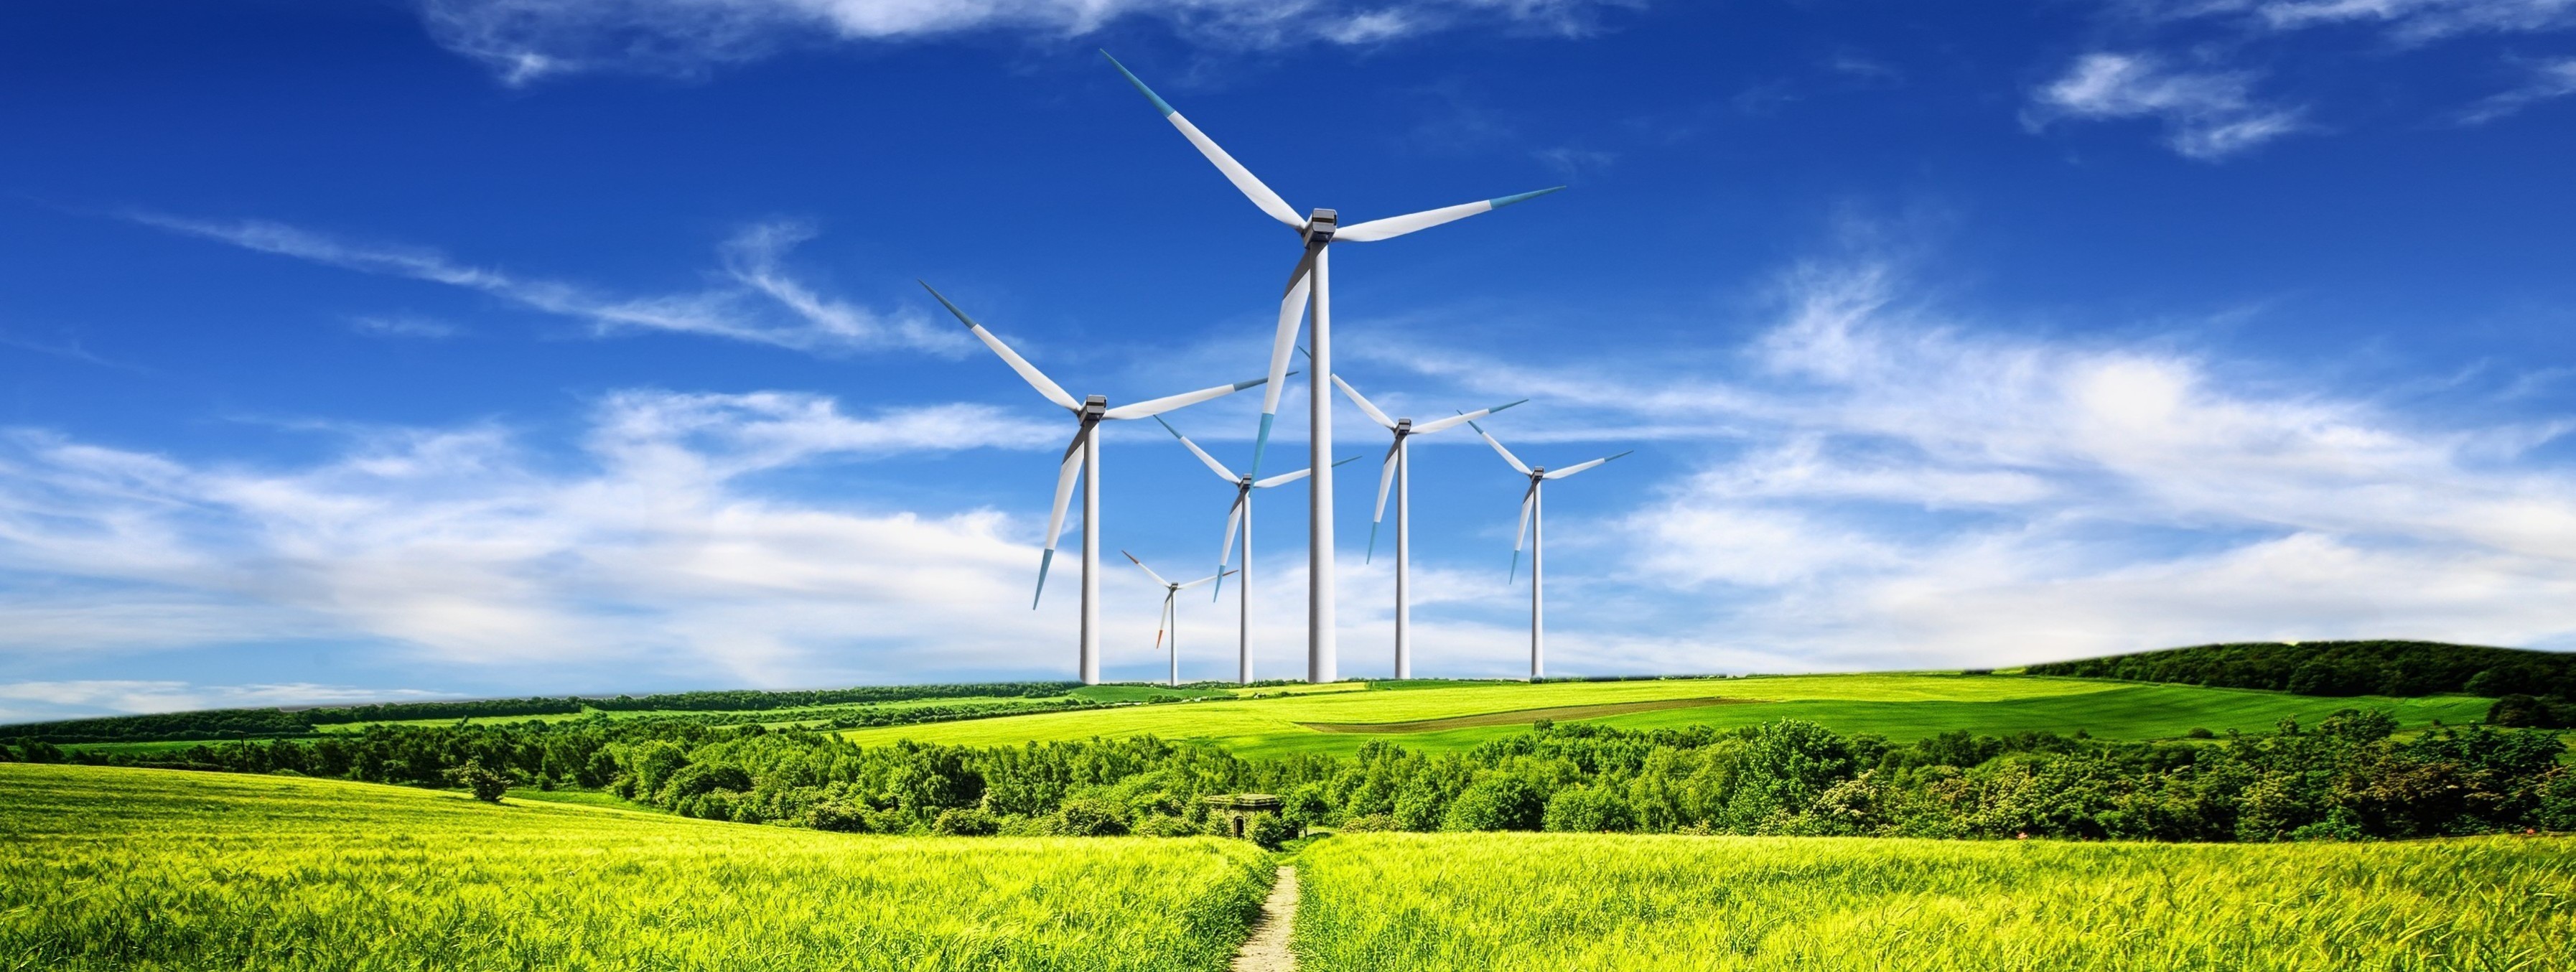 HD Green Energy Wallpapers | Download Free - 411454